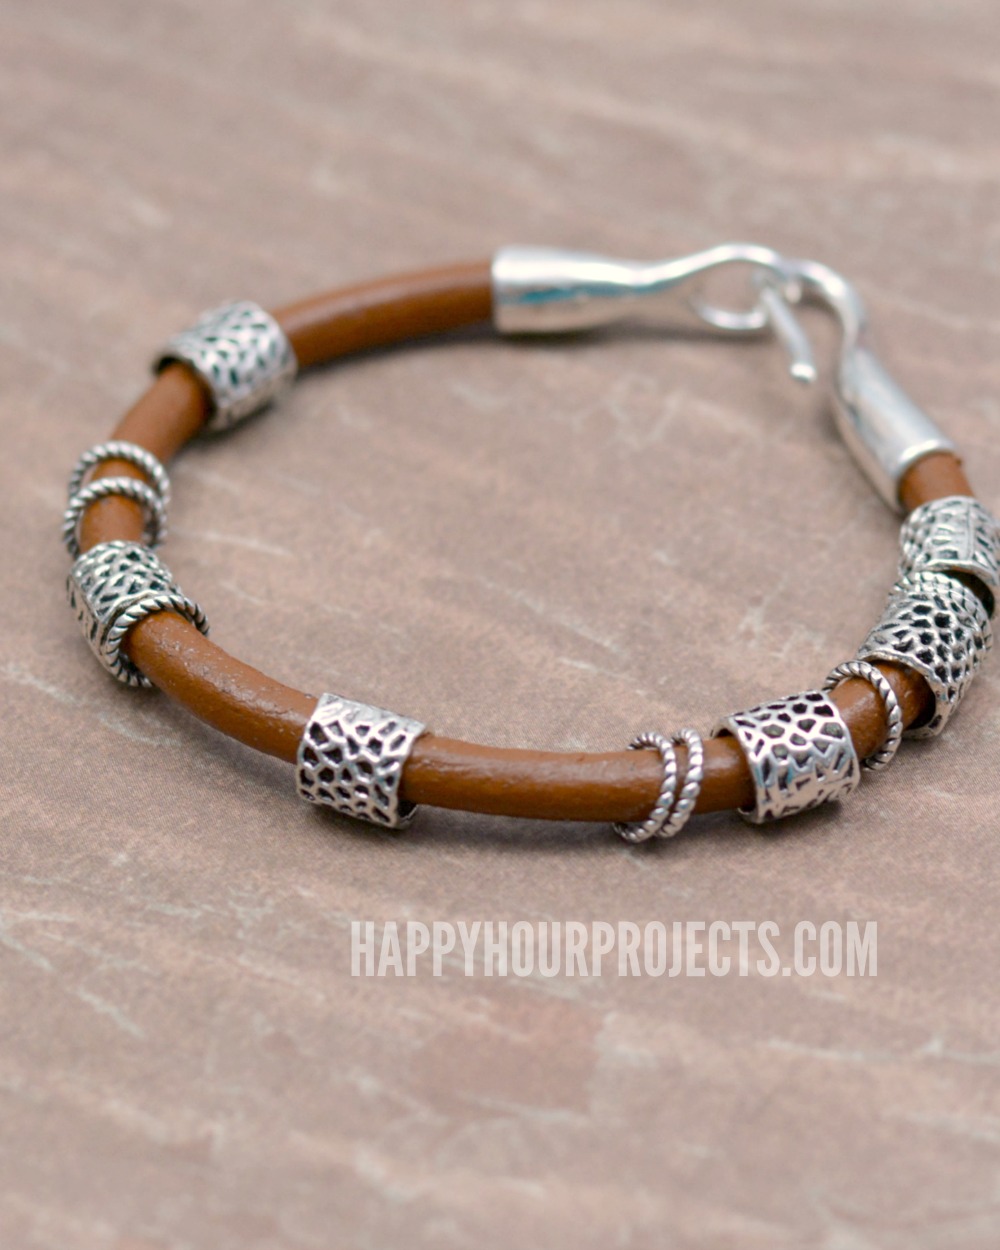 Boho Bangles | DIY leather bracelet with pewter beads and rings - tutorial at happyhourprojects.com